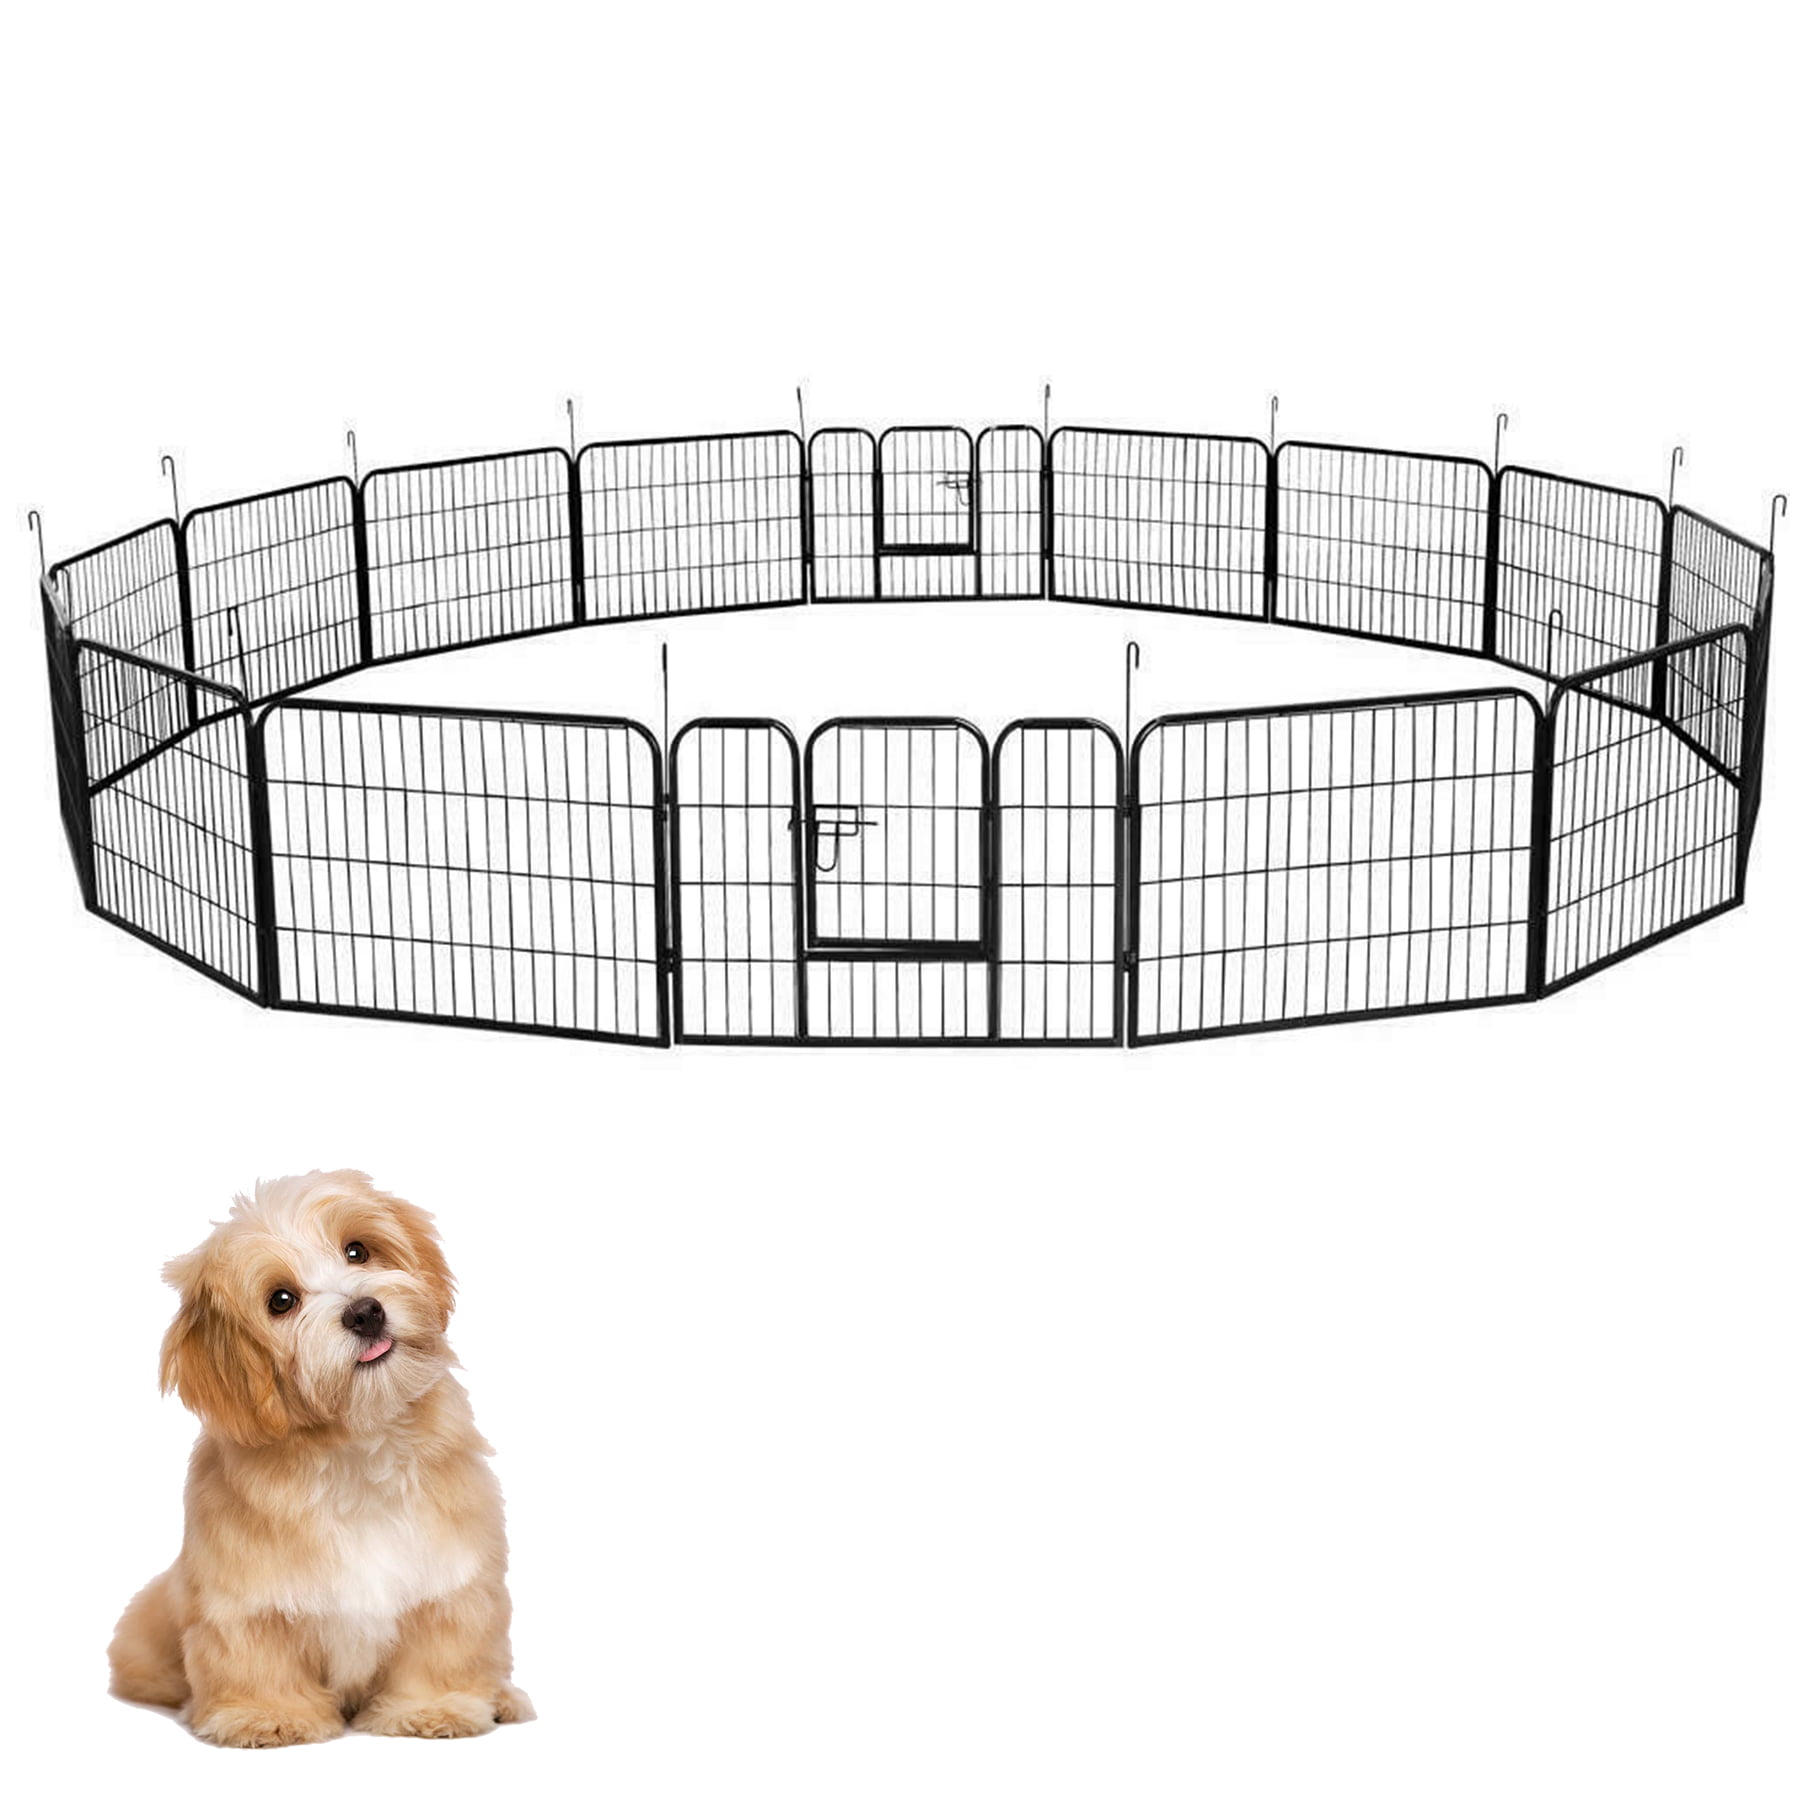 Shuishui 24 Tall Wire Fence Pet Dog Cat Folding Exercise Yard 8 Panel Metal Play Pen